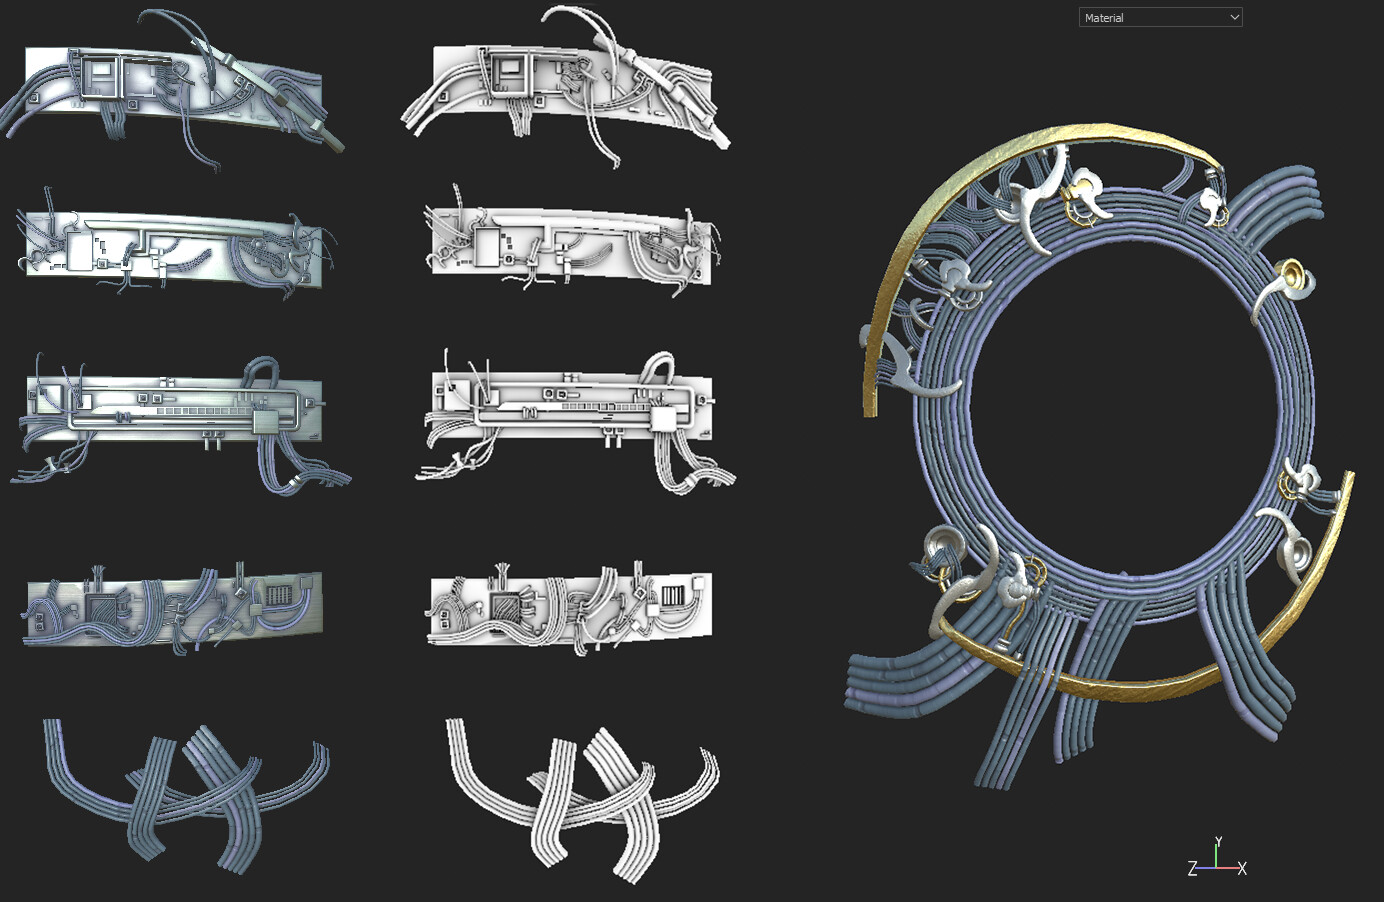 Substance Painter screenshot showing 4 panels and a cable asset bundle. View is Material to the left and AO to the right.